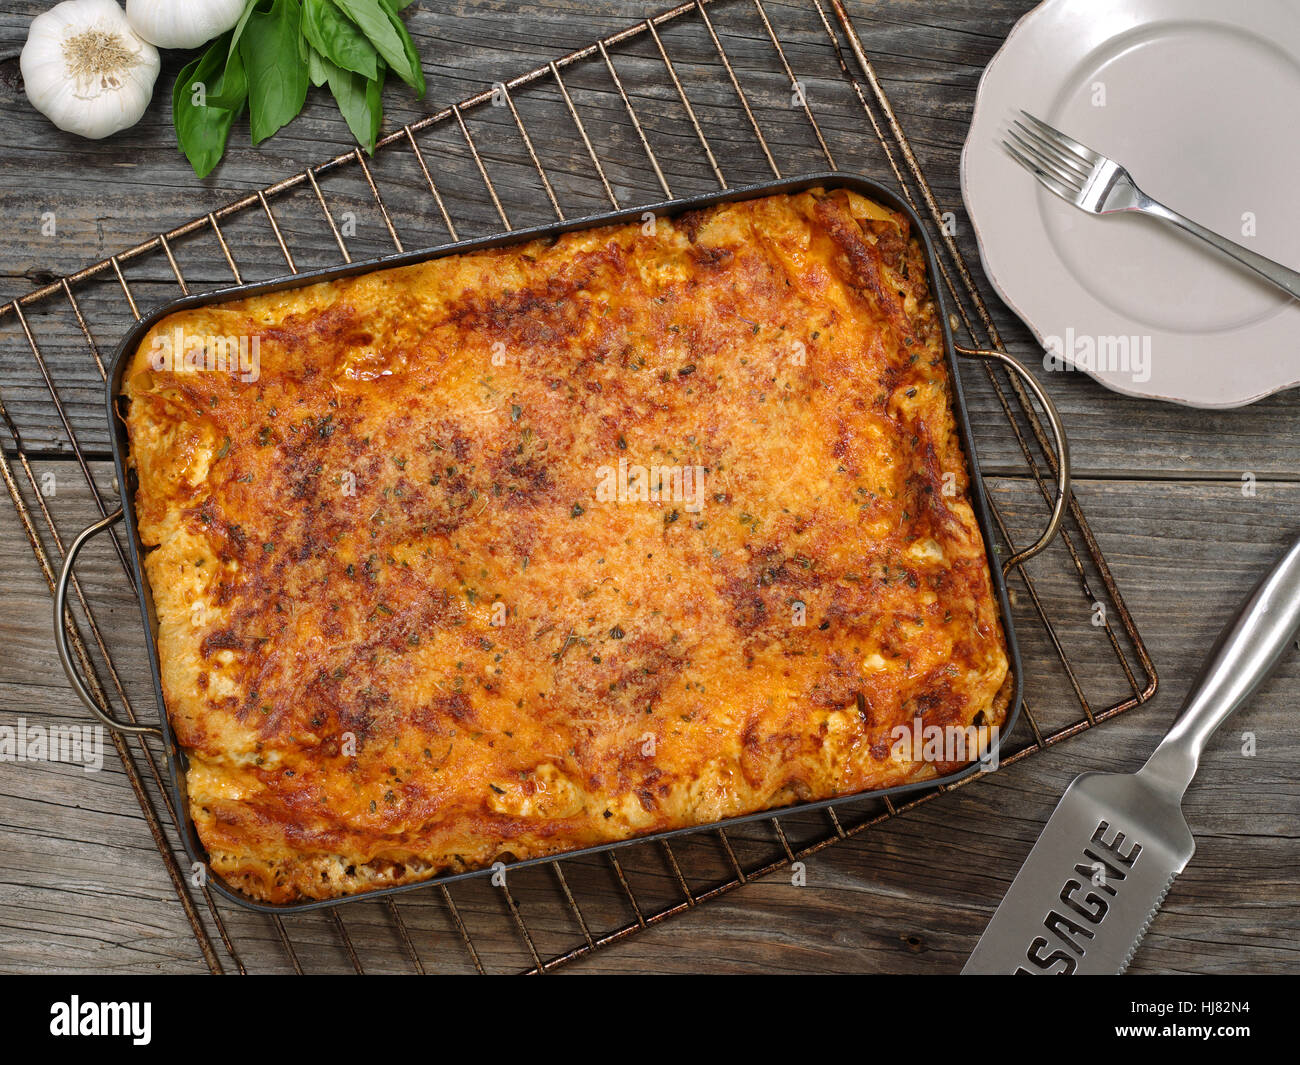 food, aliment, pasta, dish, meal, supper, dinner, homemade, baked, table, Stock Photo